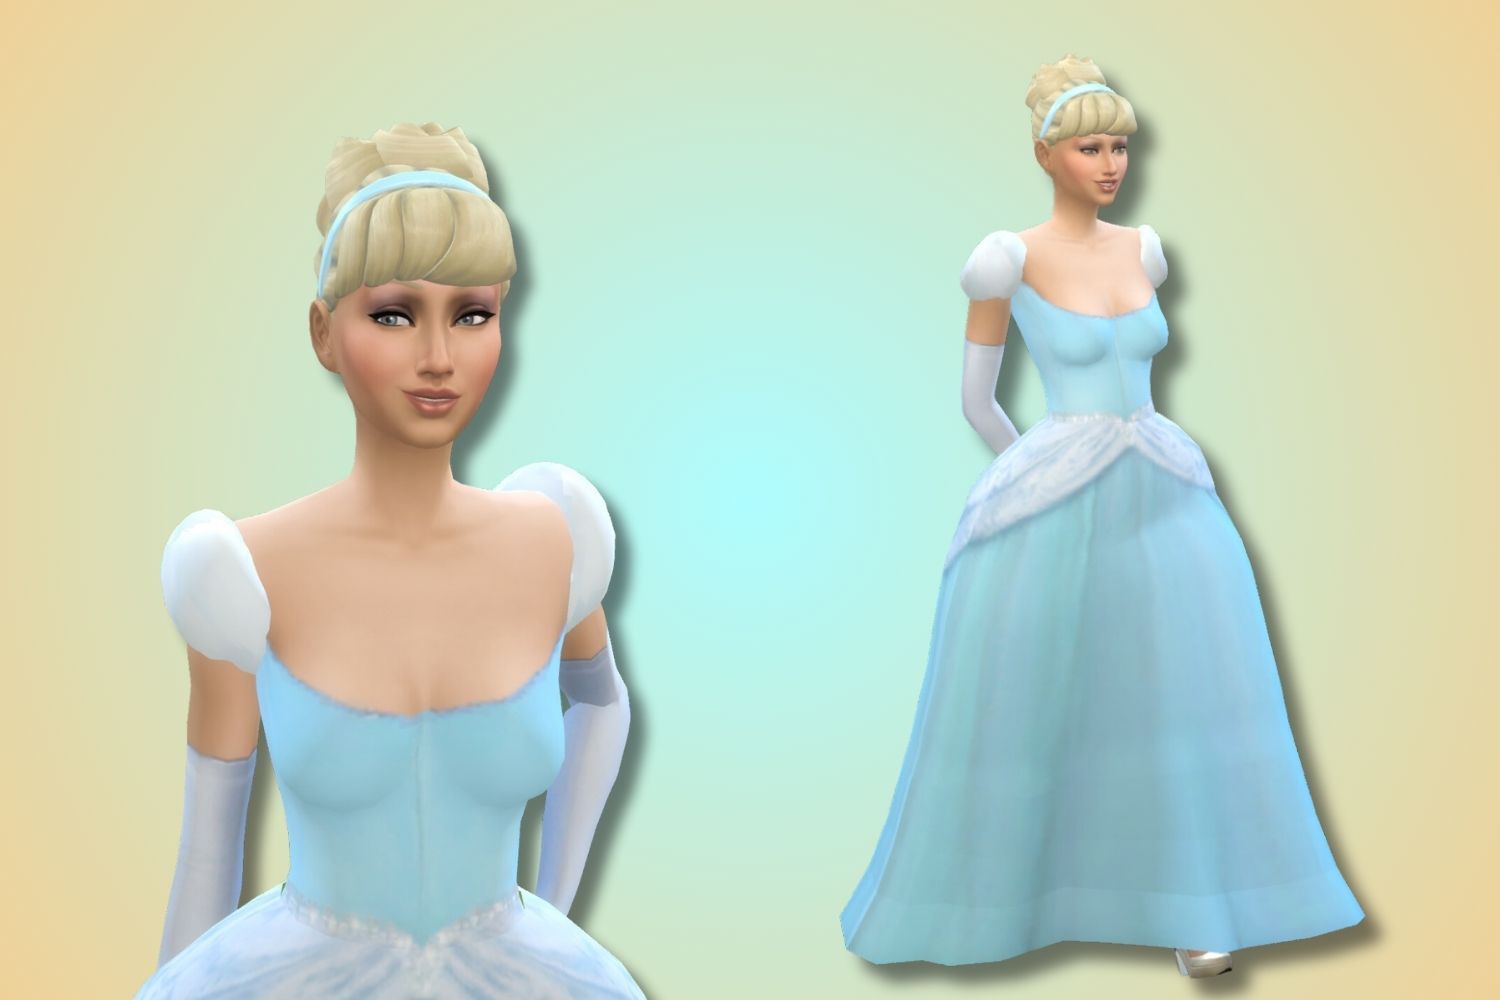 A Sim resembling Cinderella is shown against a yellow and blue background.